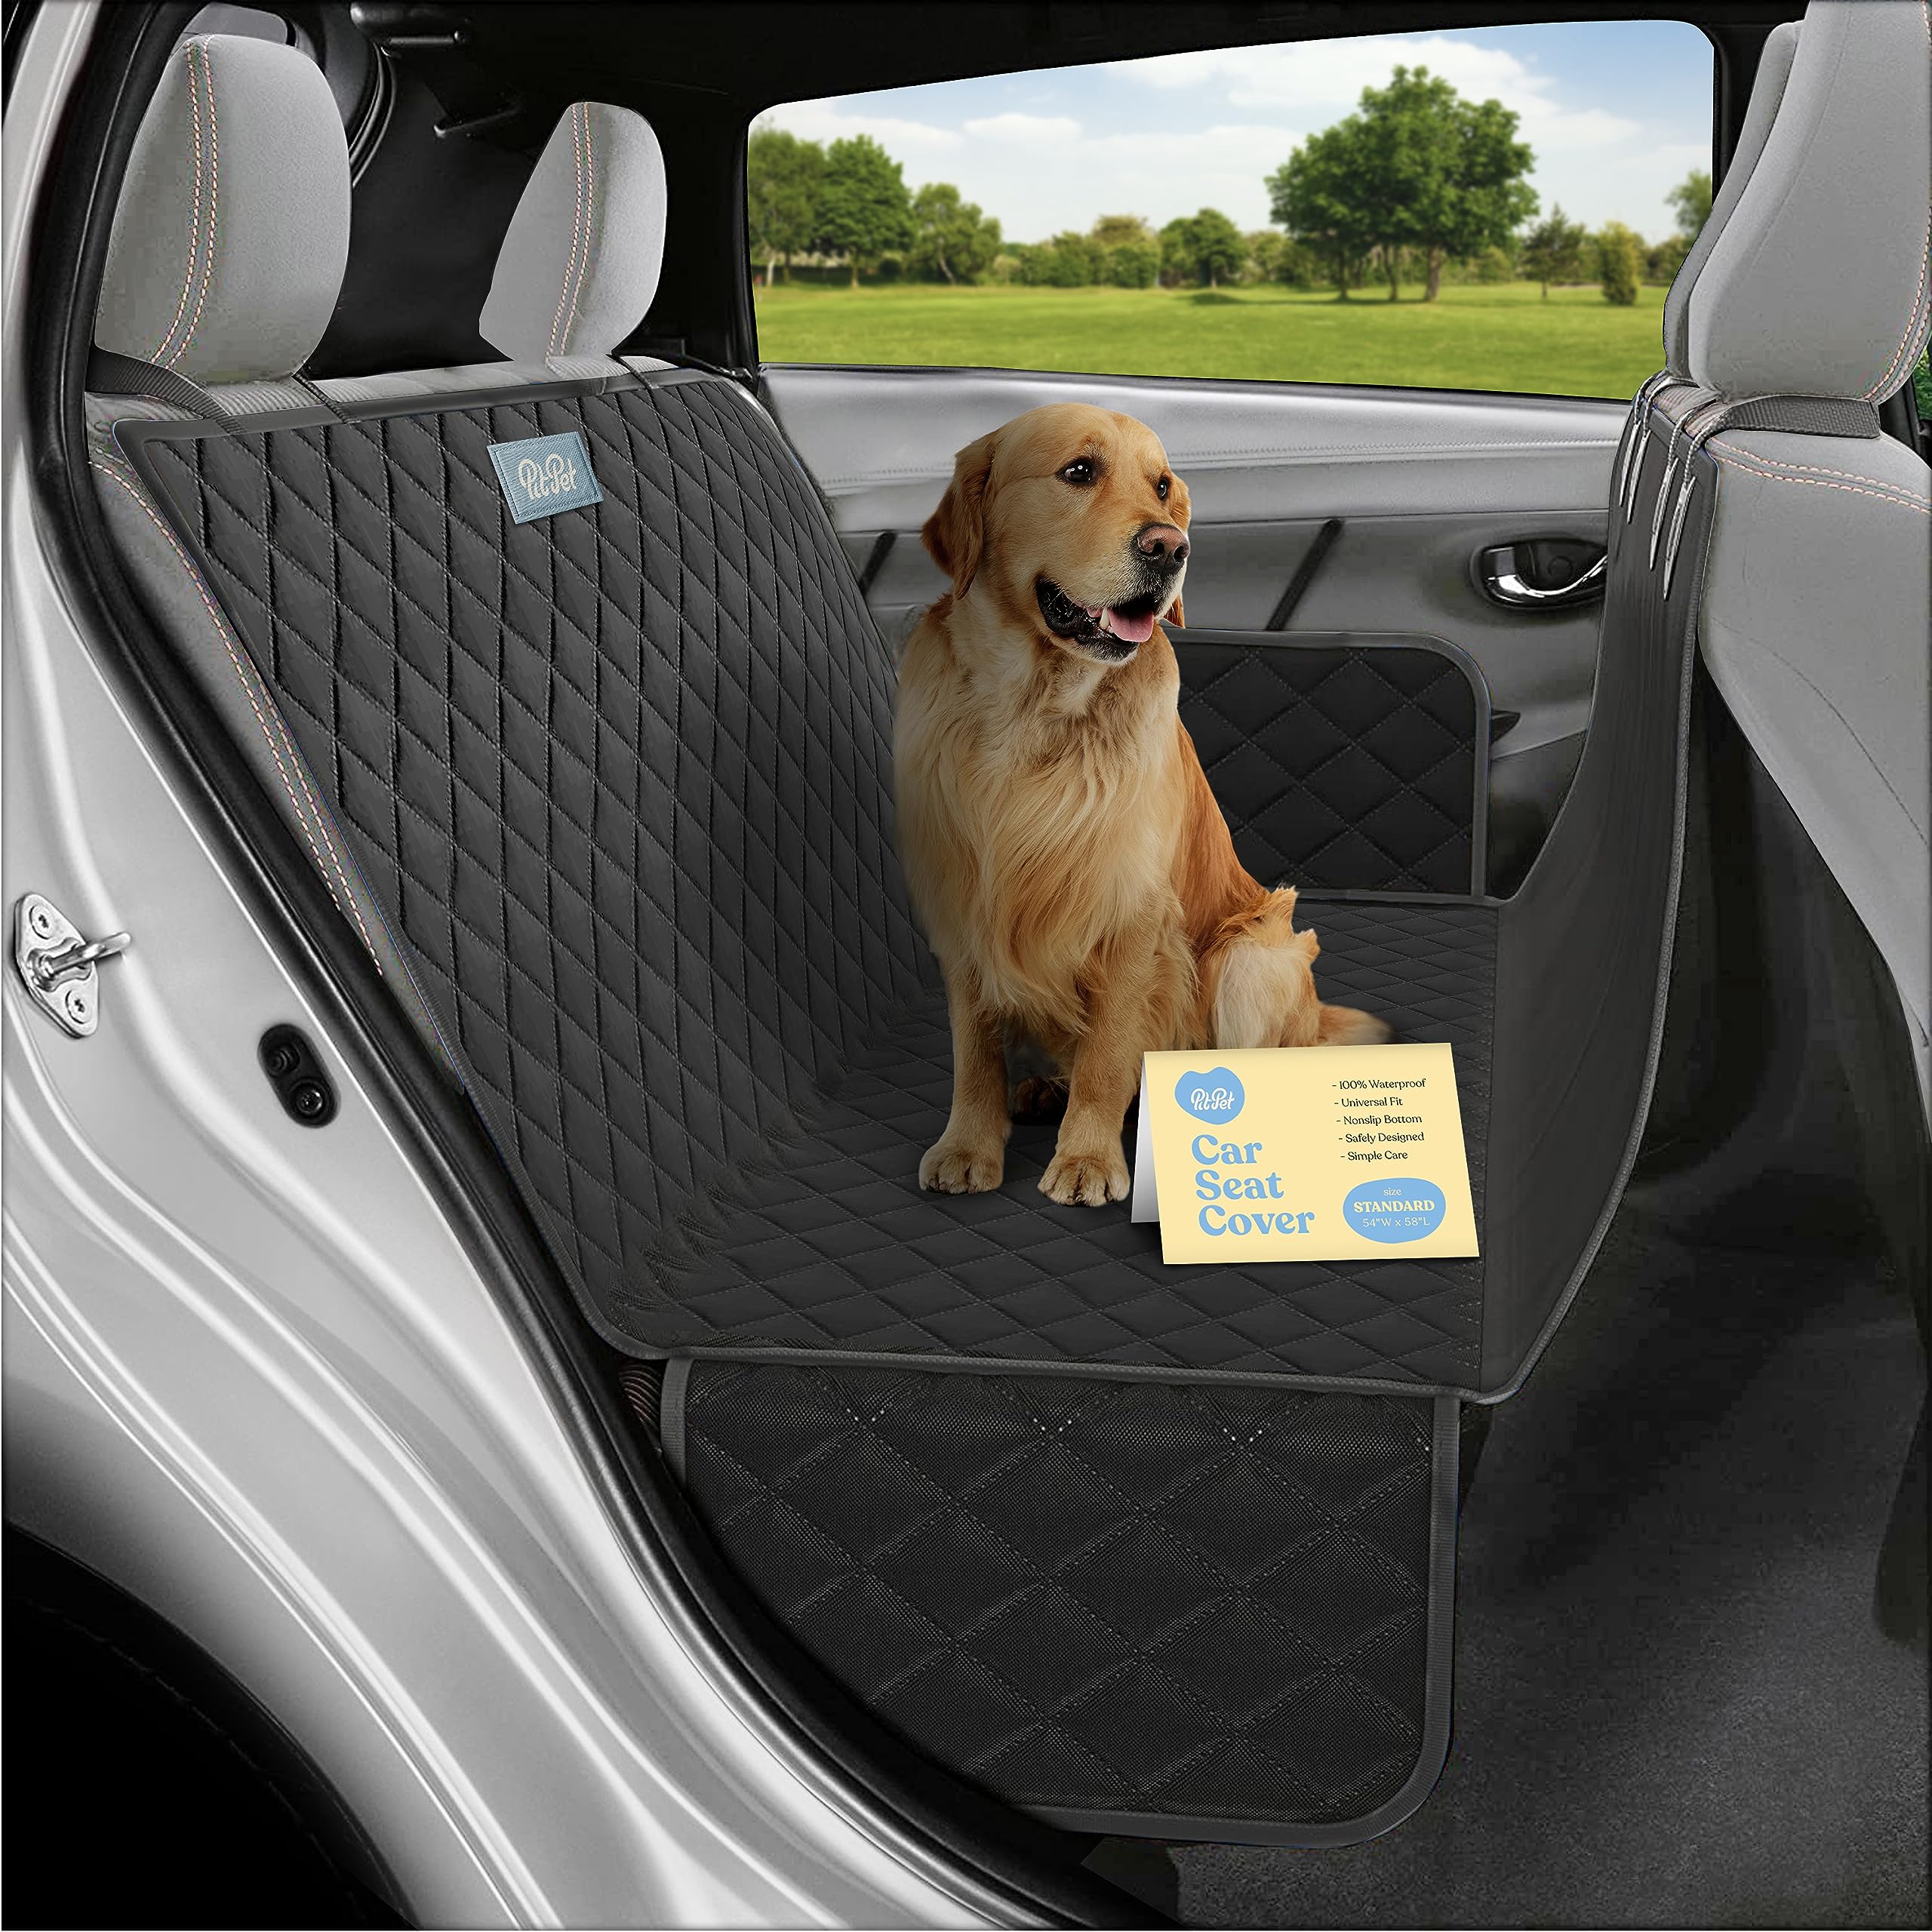 100% Waterproof Car Seat Cover For Dogs - Durable Scratch Resistant Dog Seat Cover - 600D Heavy Duty Hammock Back Seat Cover for Dogs – Universal Fit Nonslip Dog Car Seat Covers for Cars Trucks & SUV  - Like New